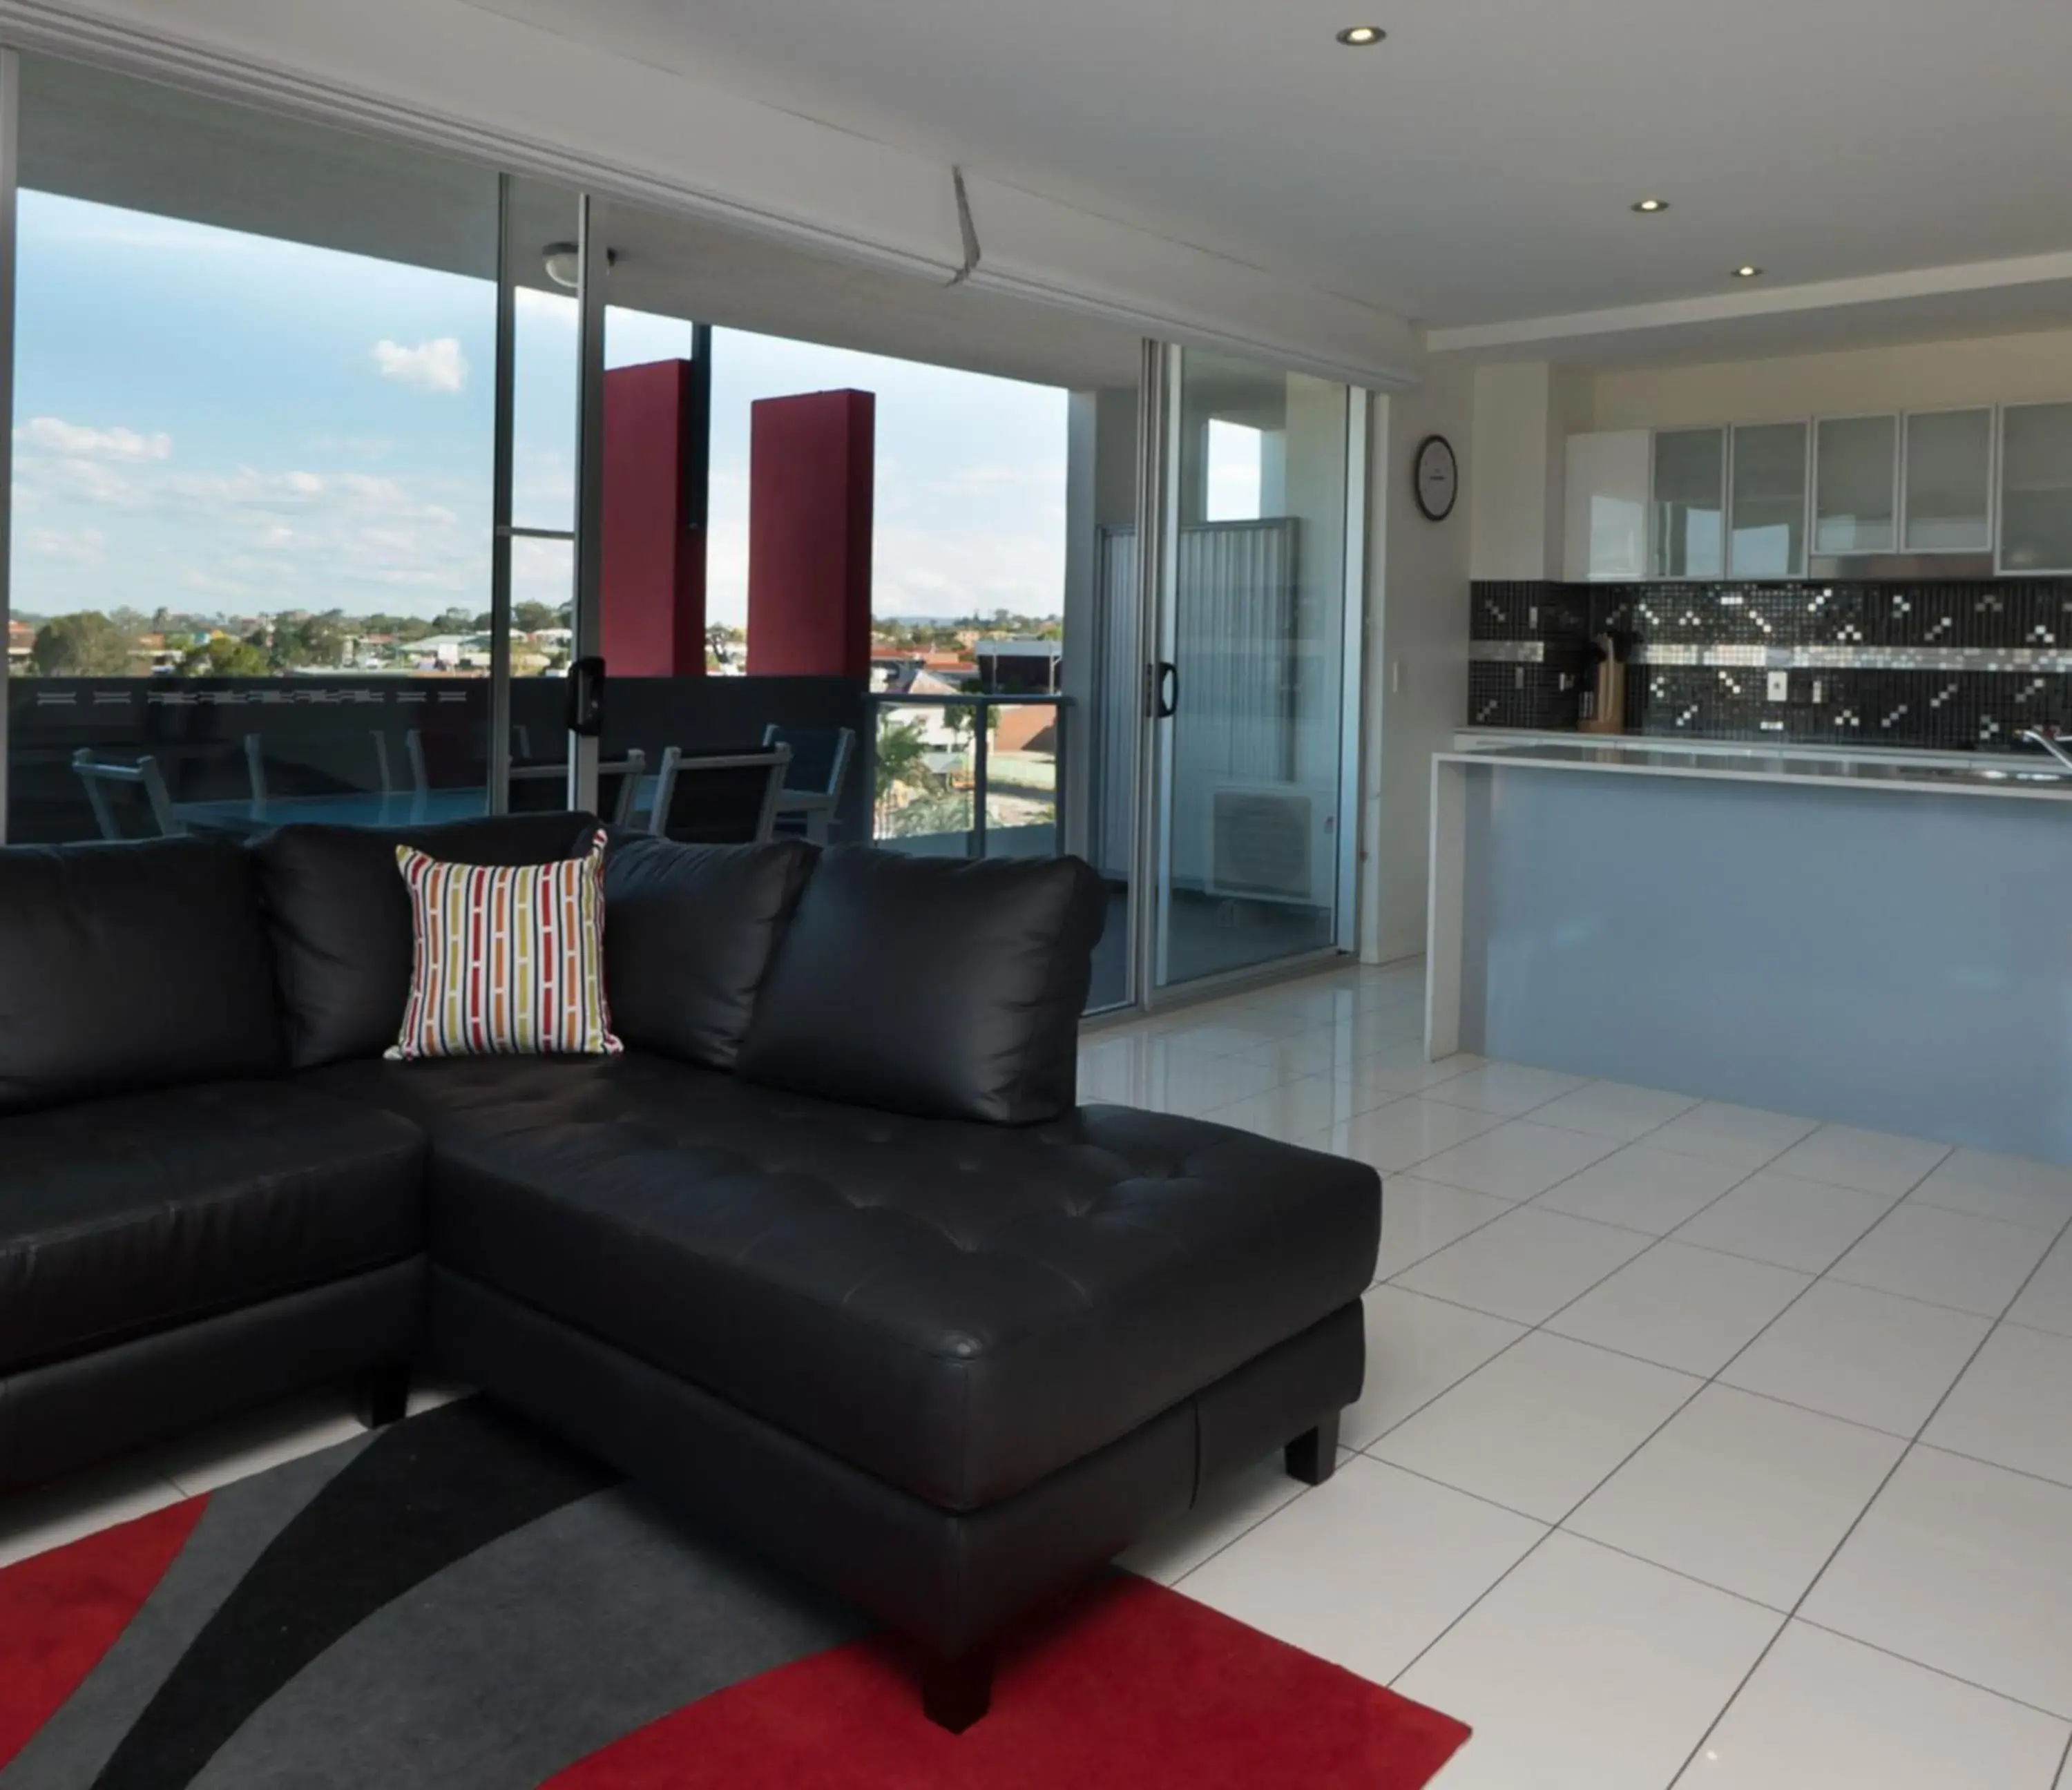 Day in The Chermside Apartments